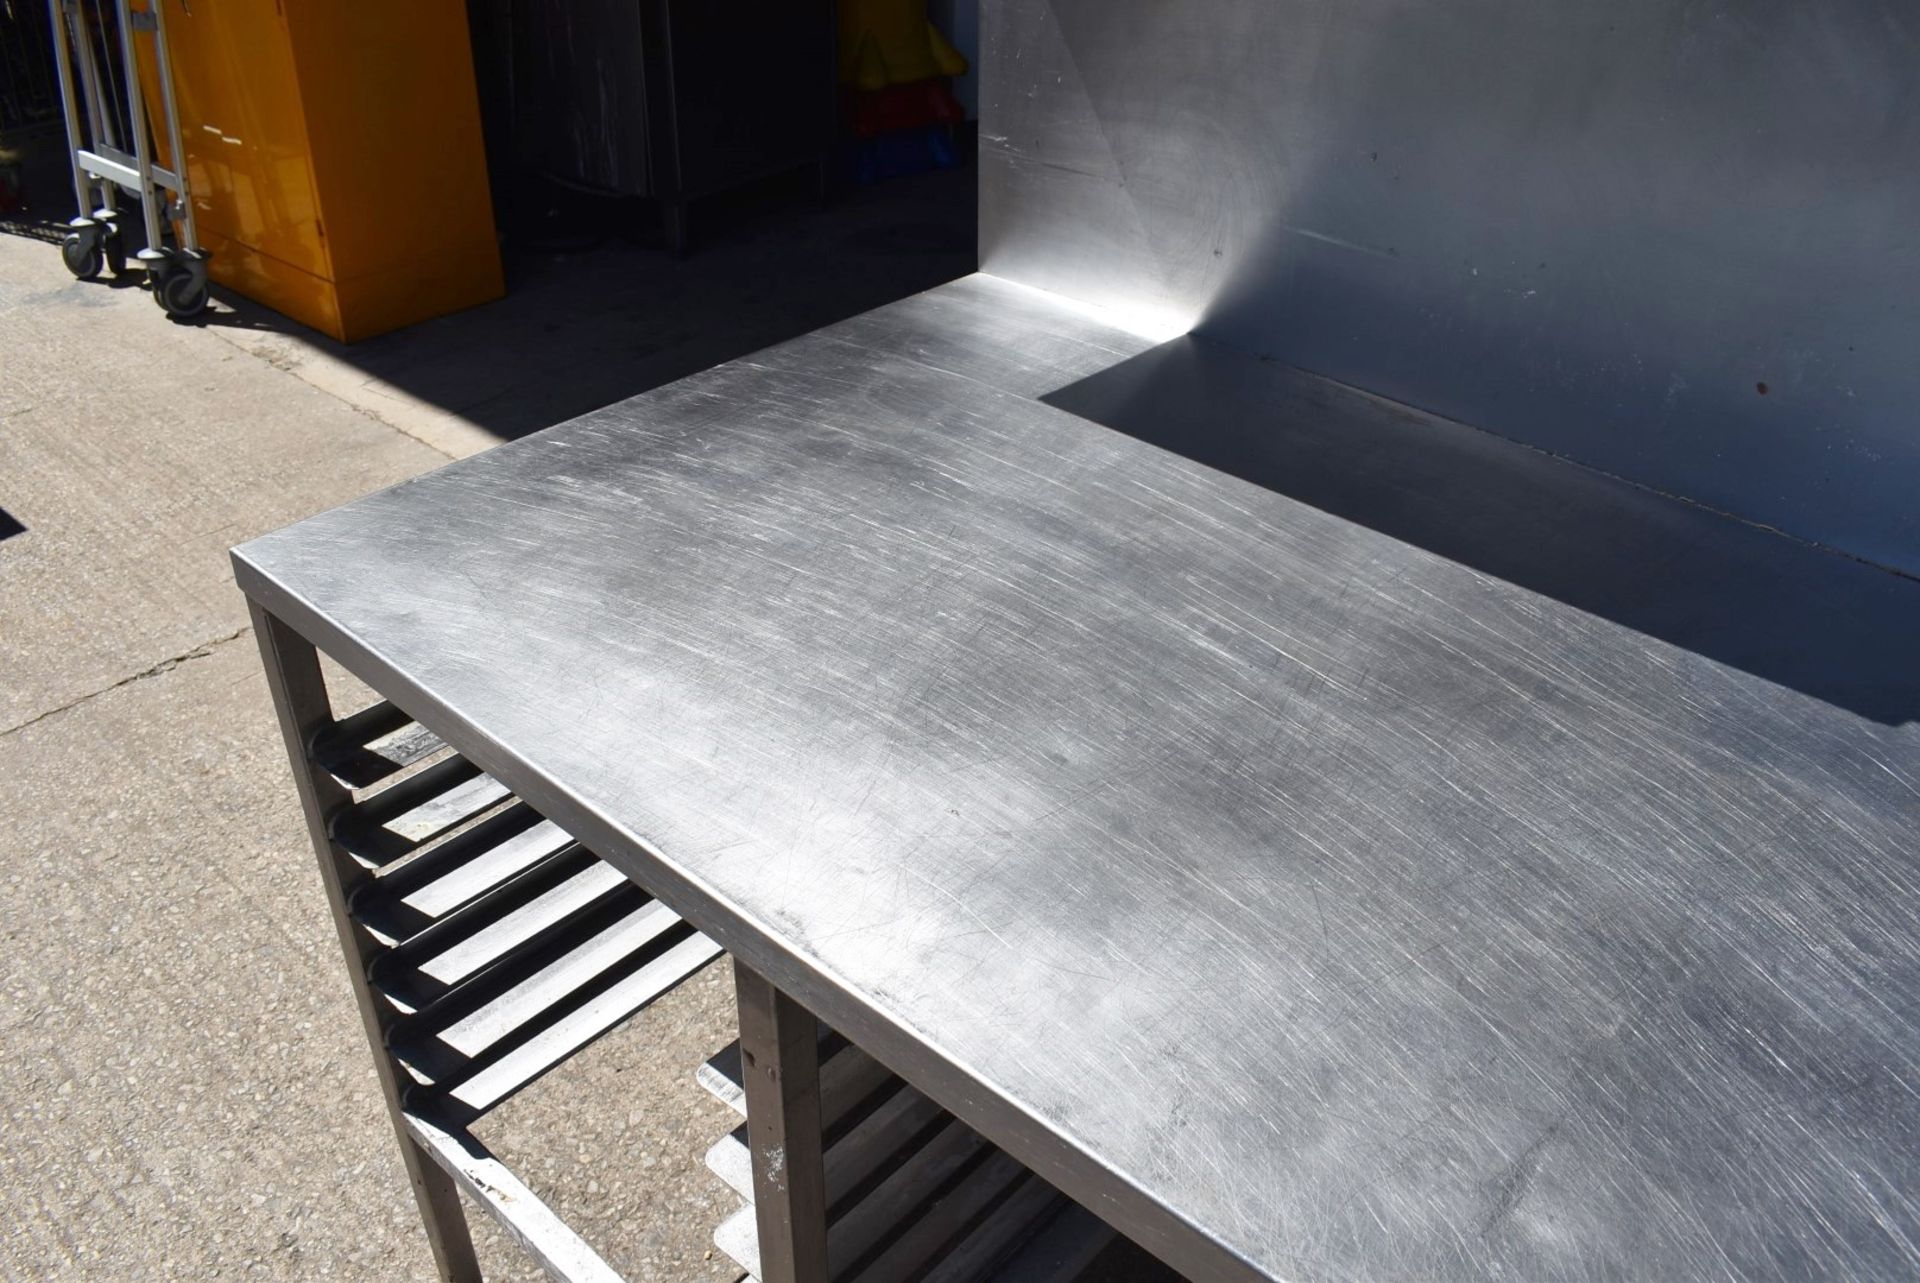 1 x Stainless Steel Prep Bench With Large Splashback Panel, Multiple Shelves and Tray Runners - Rece - Image 9 of 11